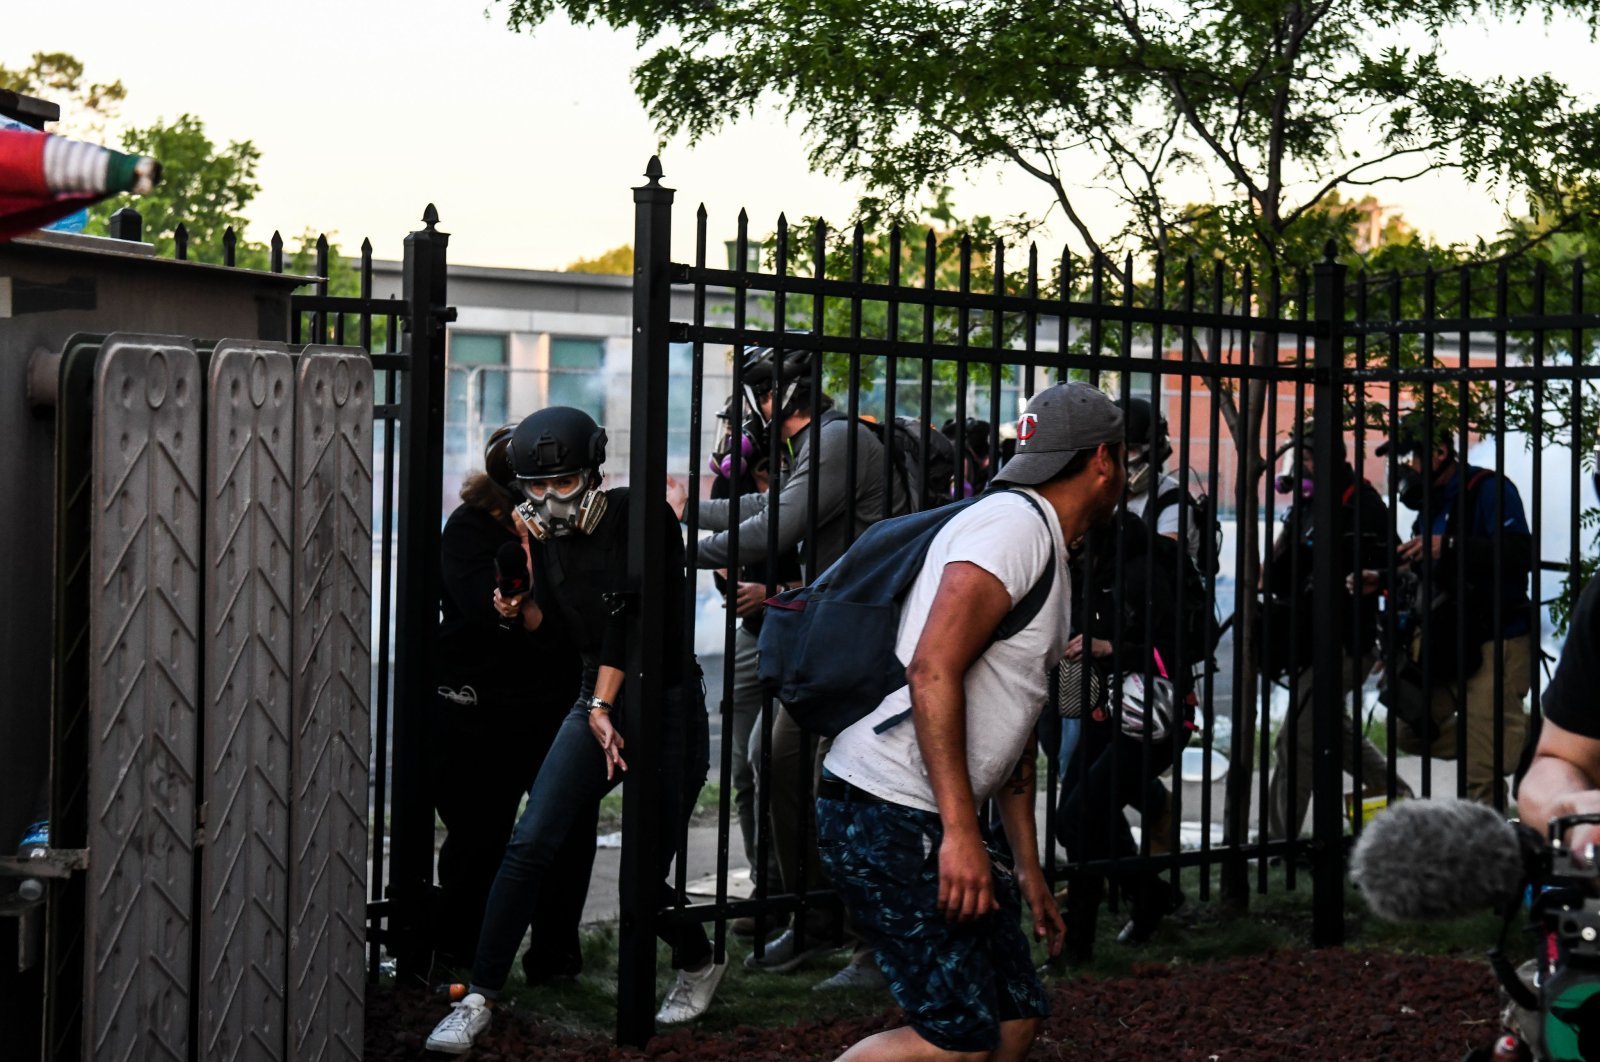 Protestors and media personnel run to take cover as police start firing tear gas and rubber bullets near the 5th police precinct following a demonstration to call for justice for George Floyd, in Minneapolis, Minnesota, U.S., May 30, 2020. (AFP Photo)